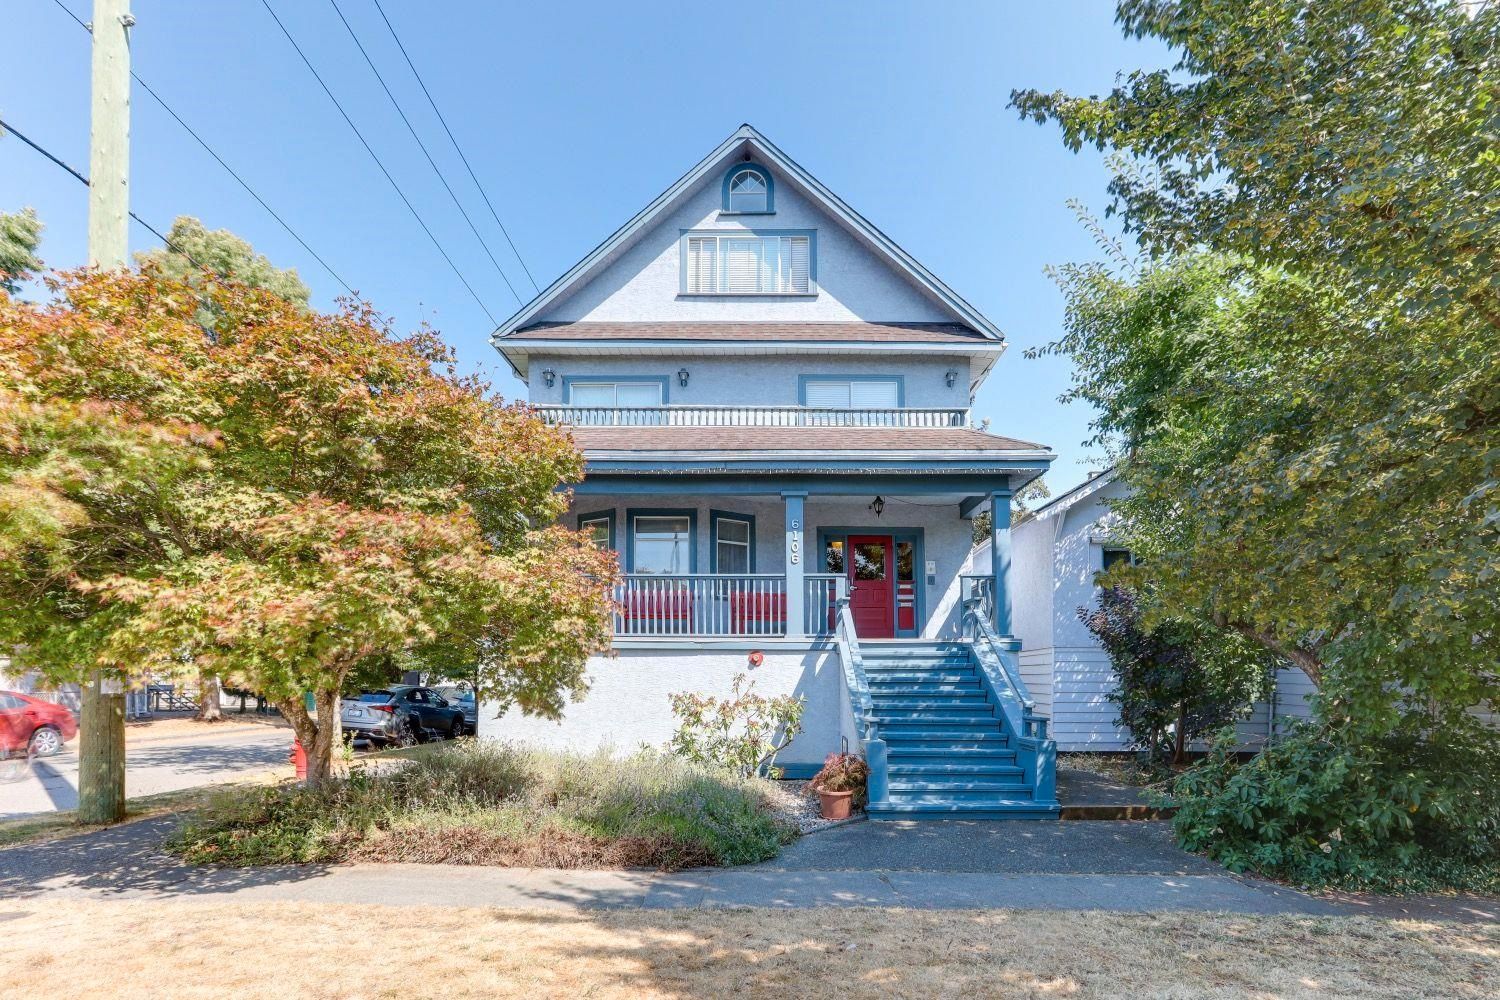 Main Photo: 6106 CHESTER STREET in Vancouver: Fraser VE Multifamily for sale (Vancouver East)  : MLS®# R2613965